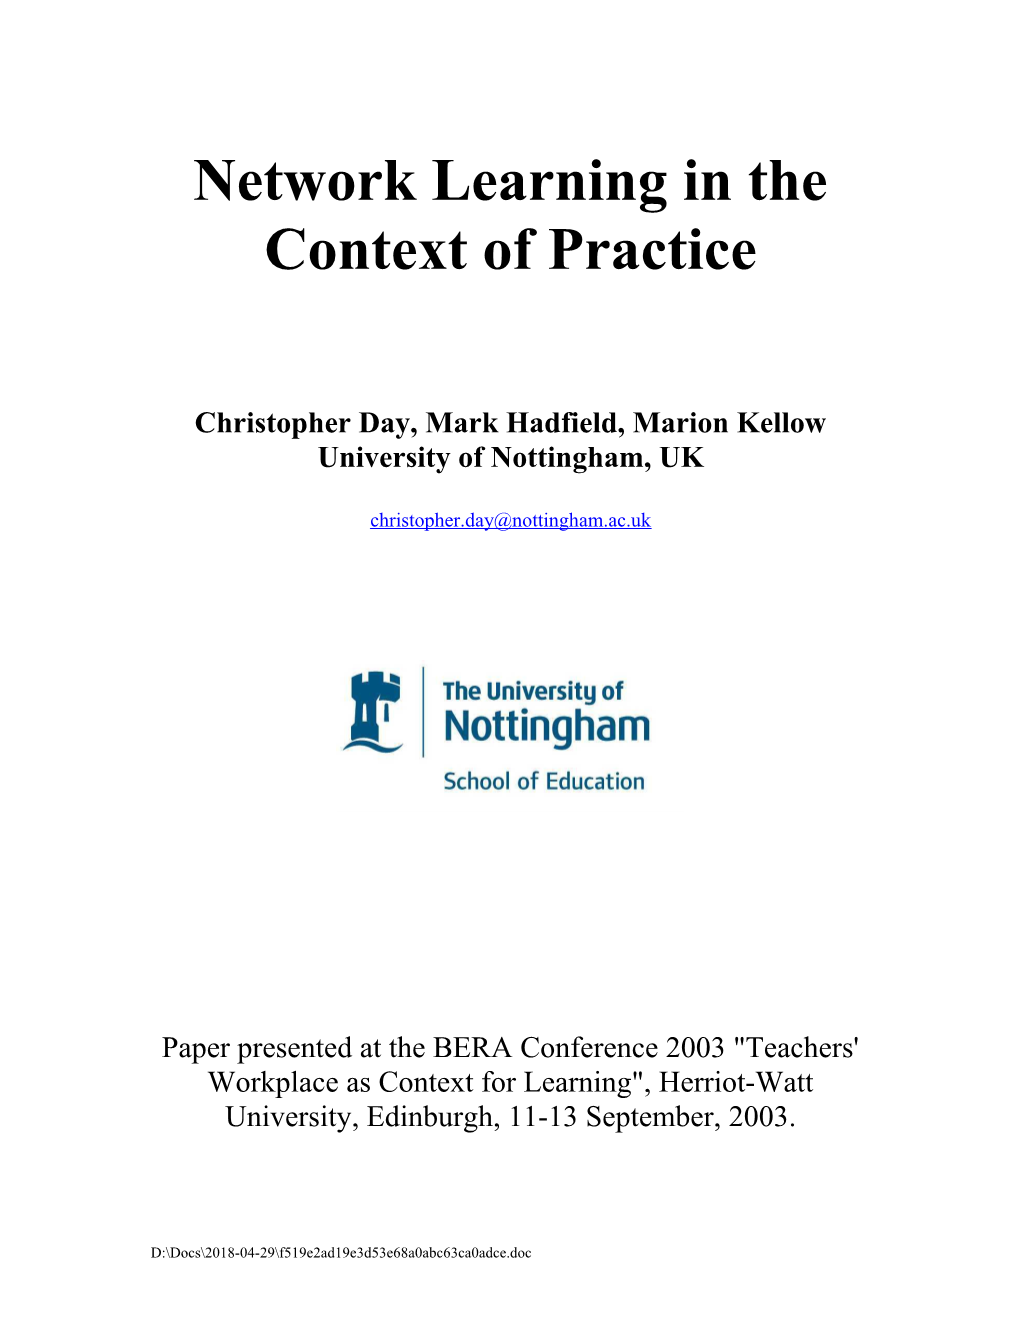 Partnerships, Teacher Professionalism and Network Learning: a Matter of Trust